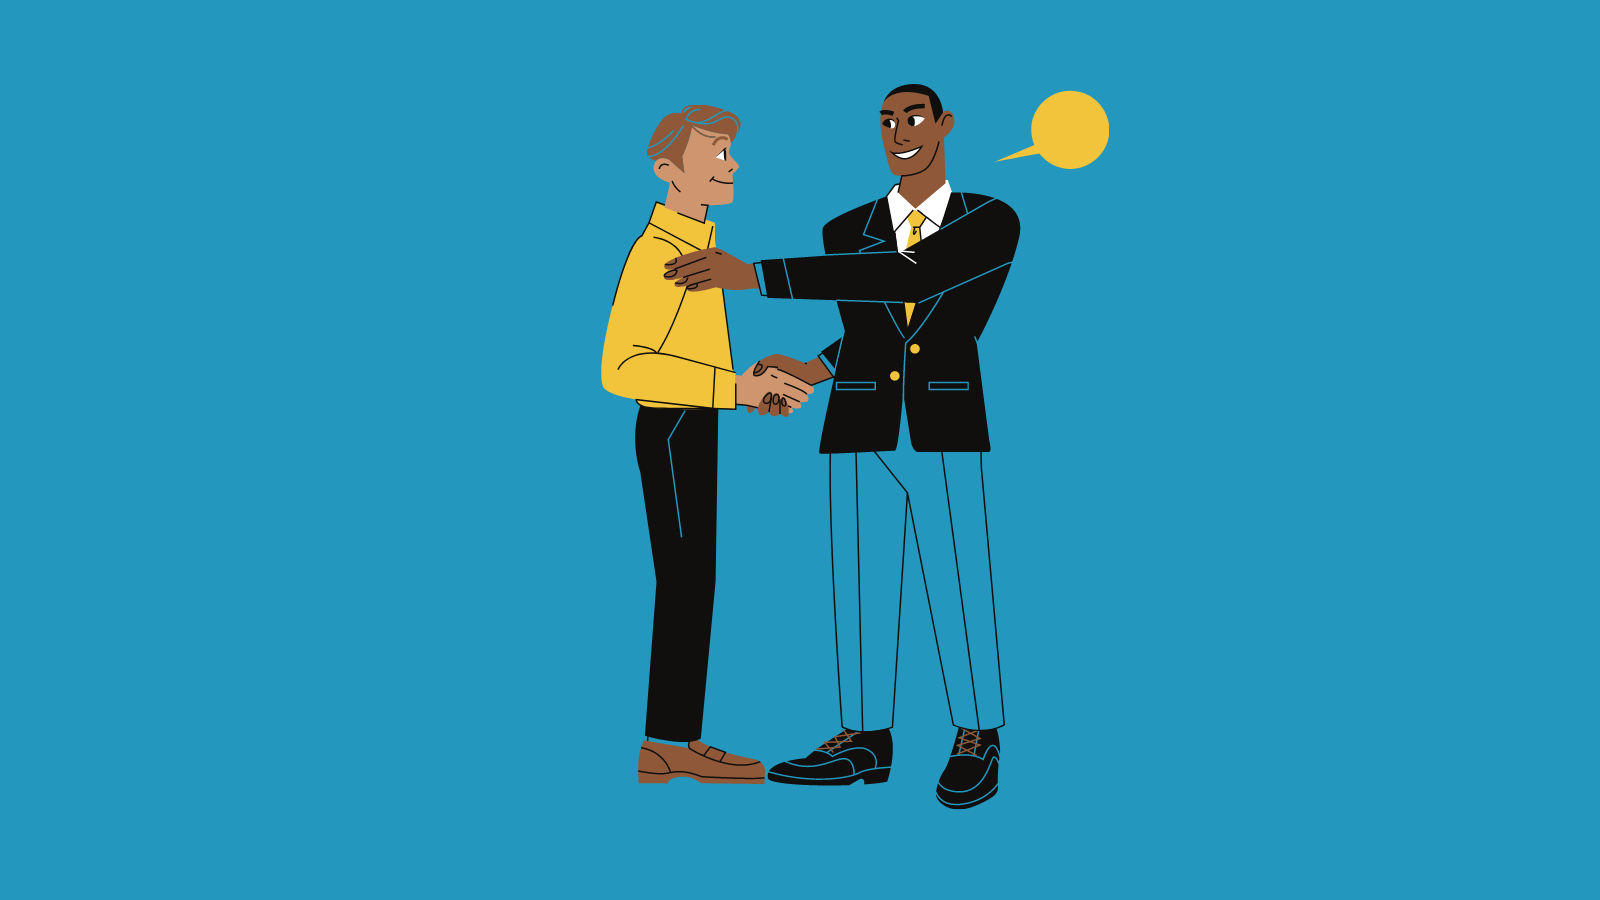 Two professionally-dressed people shaking hands